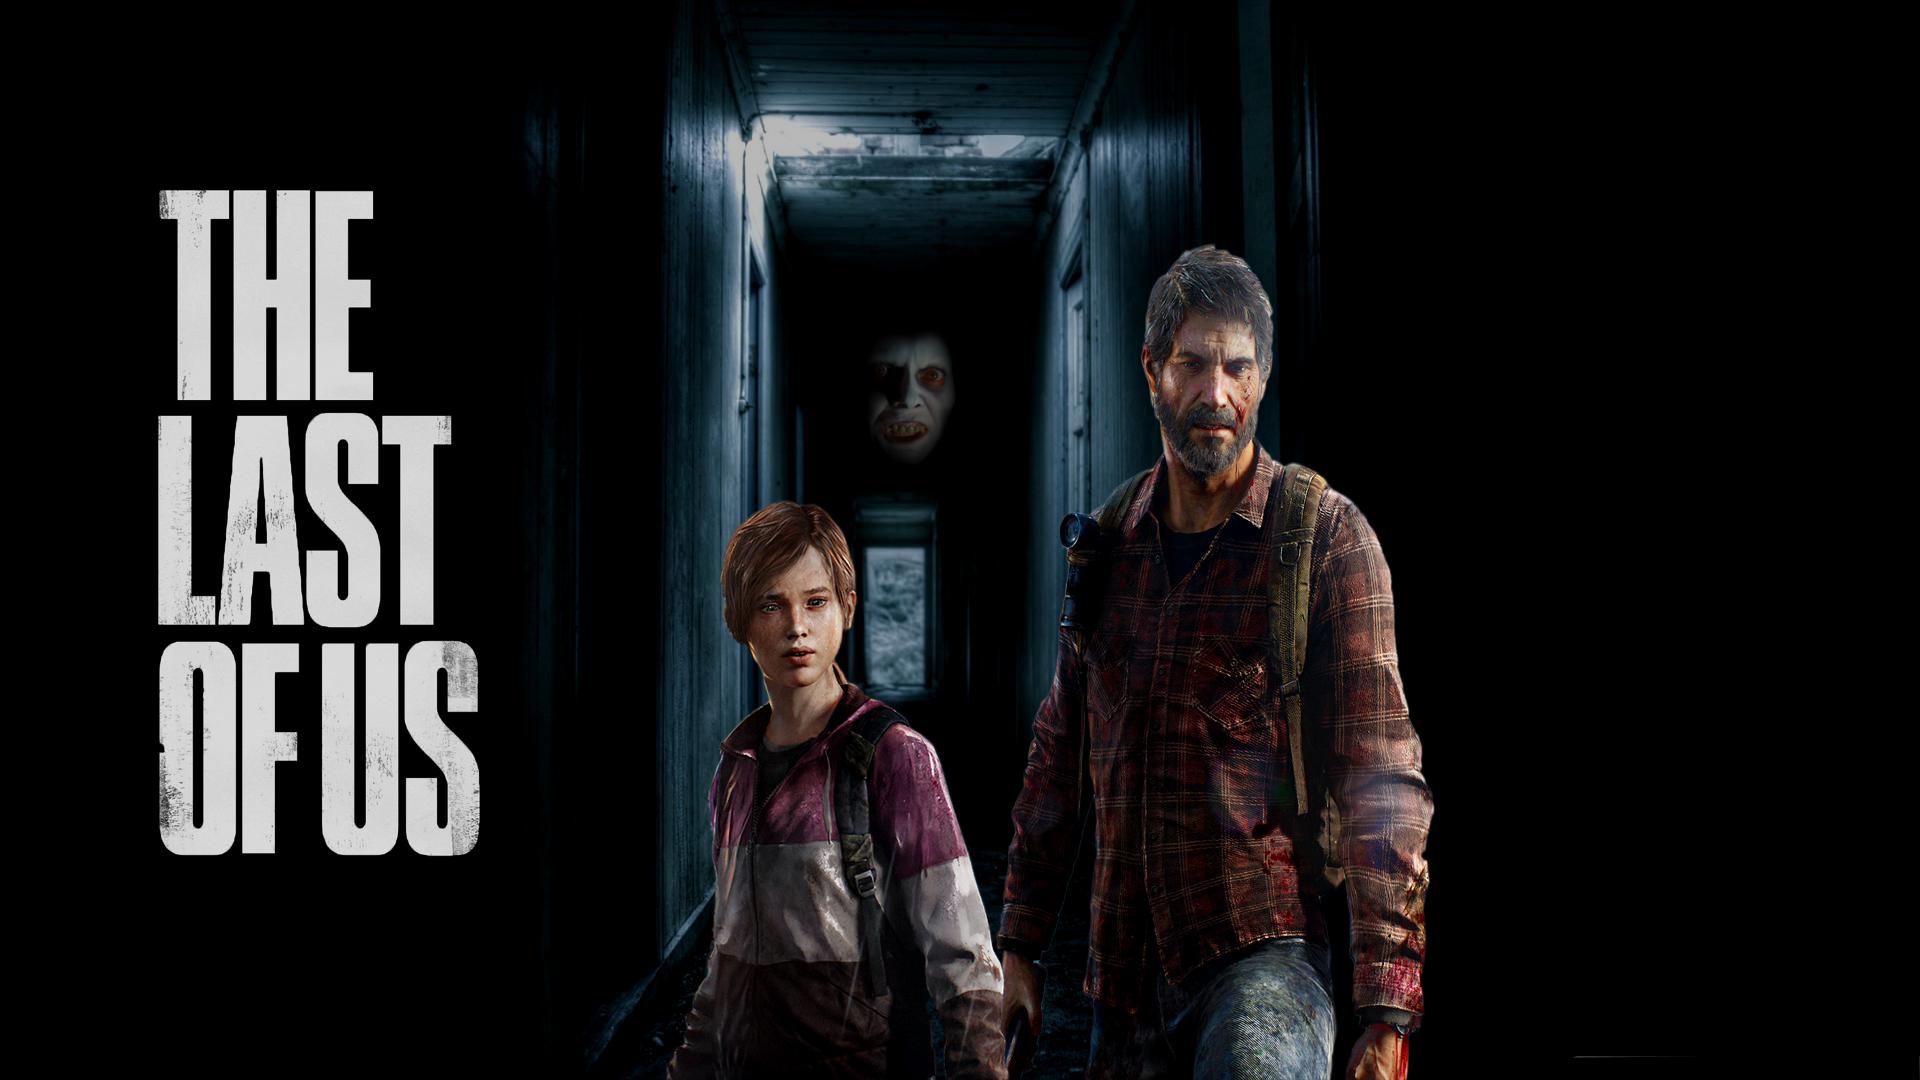 The Last of Us Remastered Wallpaper Free The Last of Us Remastered Background